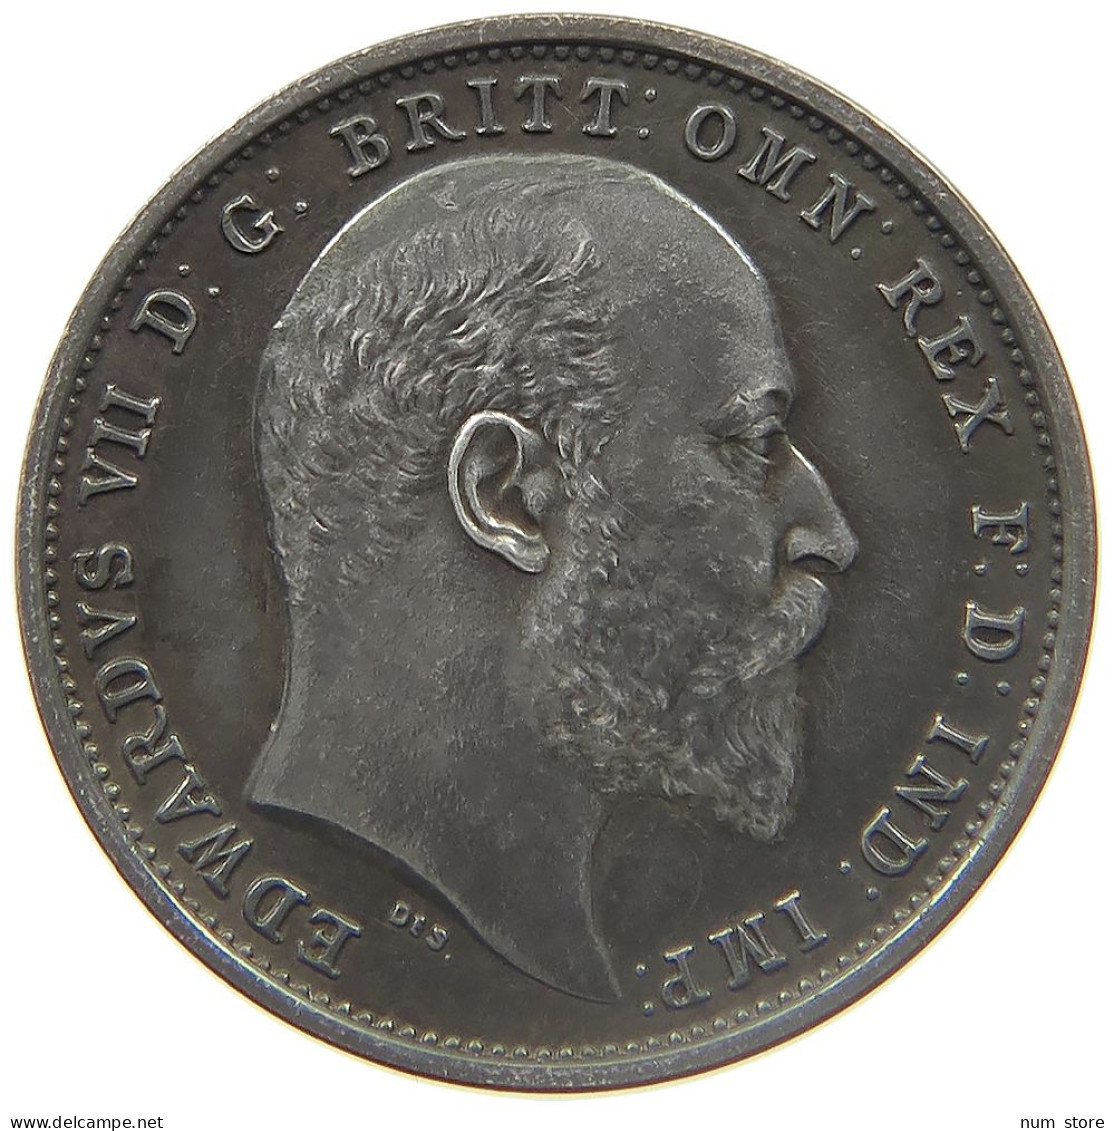 GREAT BRITAIN FOURPENCE 1902 EDWARD VII., 1901 - 1910 #MA 023058 - G. 4 Pence